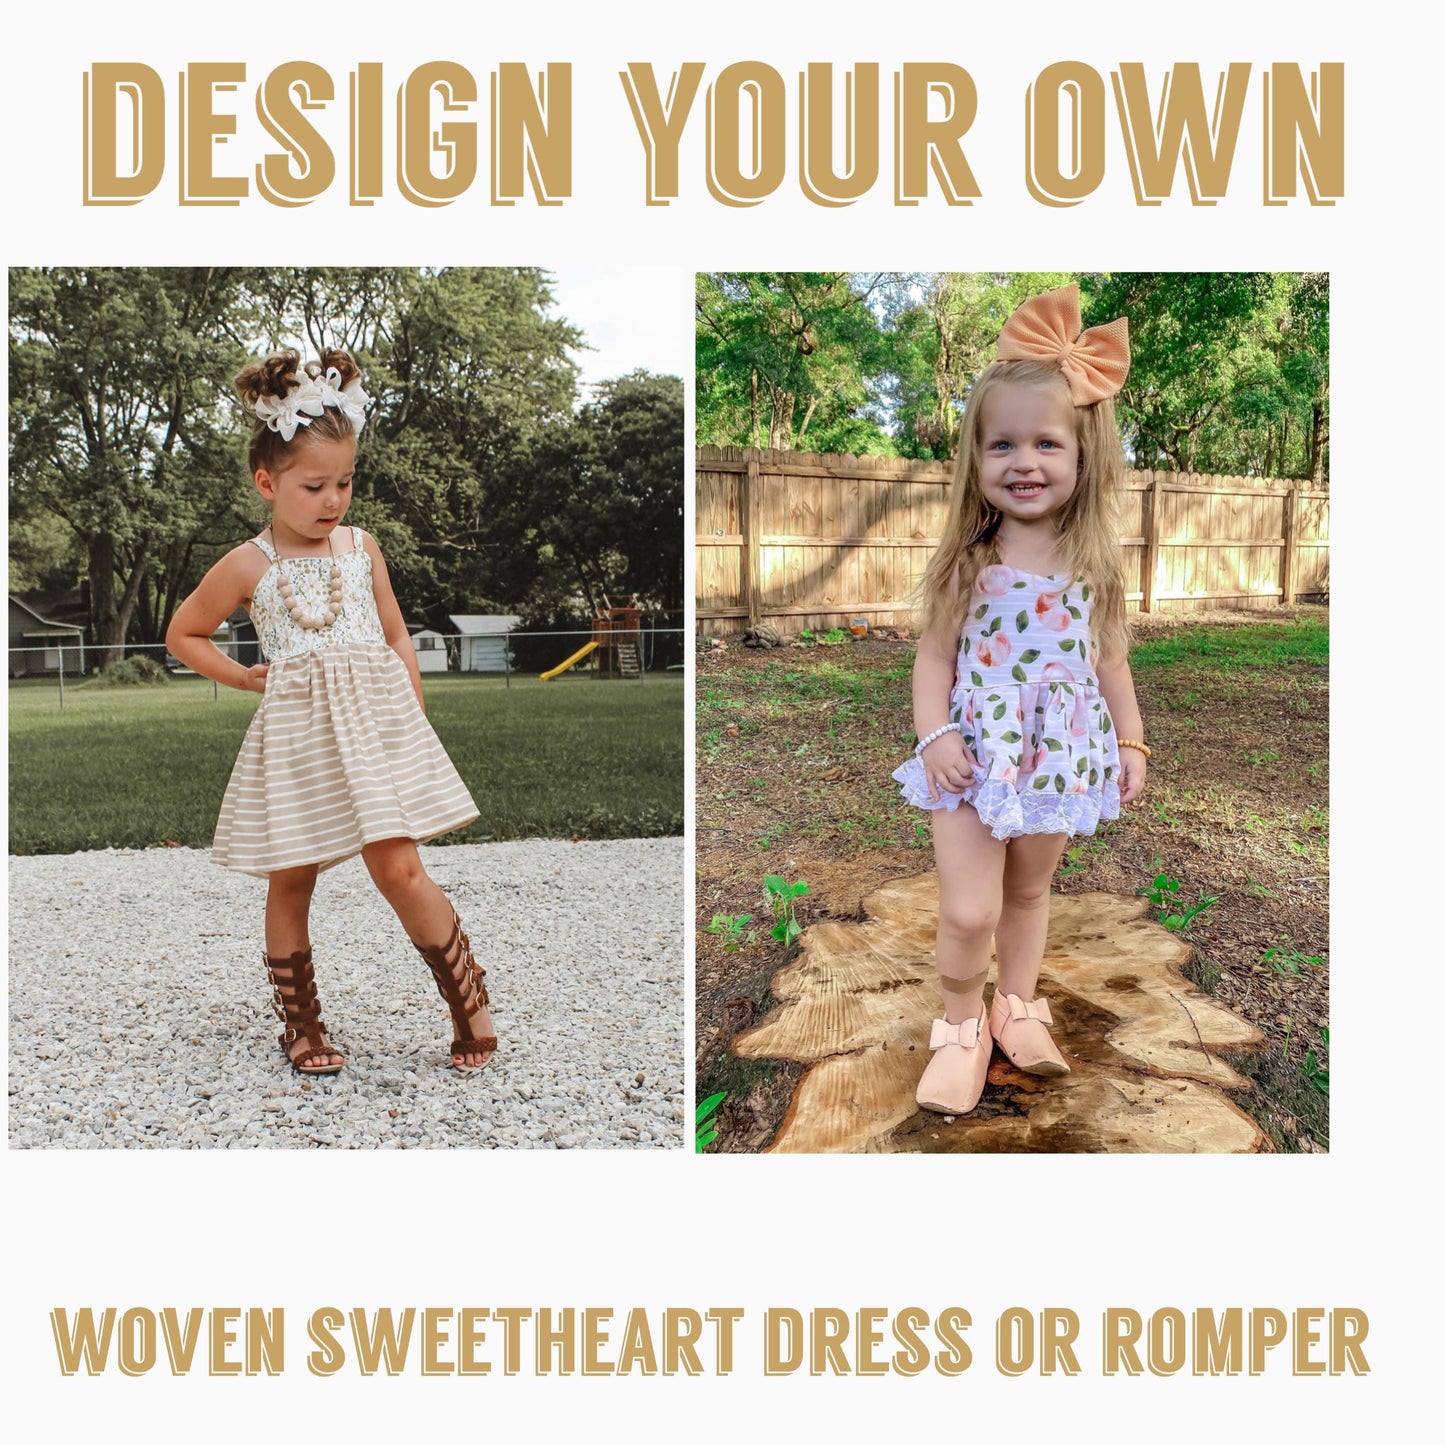 Design your own | Woven Sweetheart top dress or romper